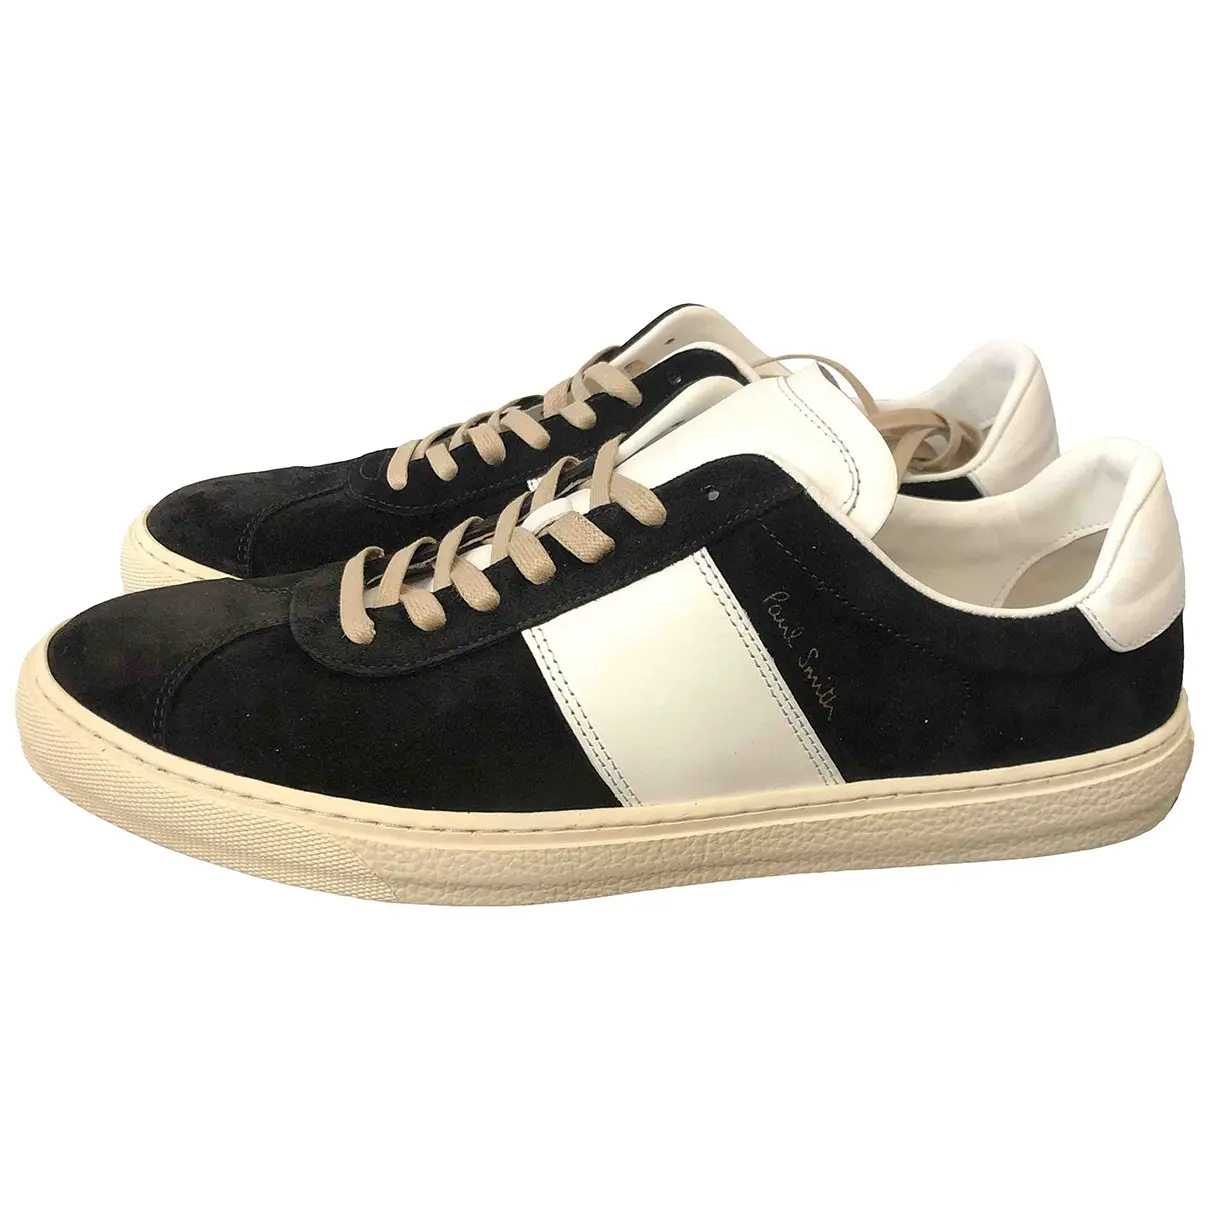 Low trainers Paul Smith